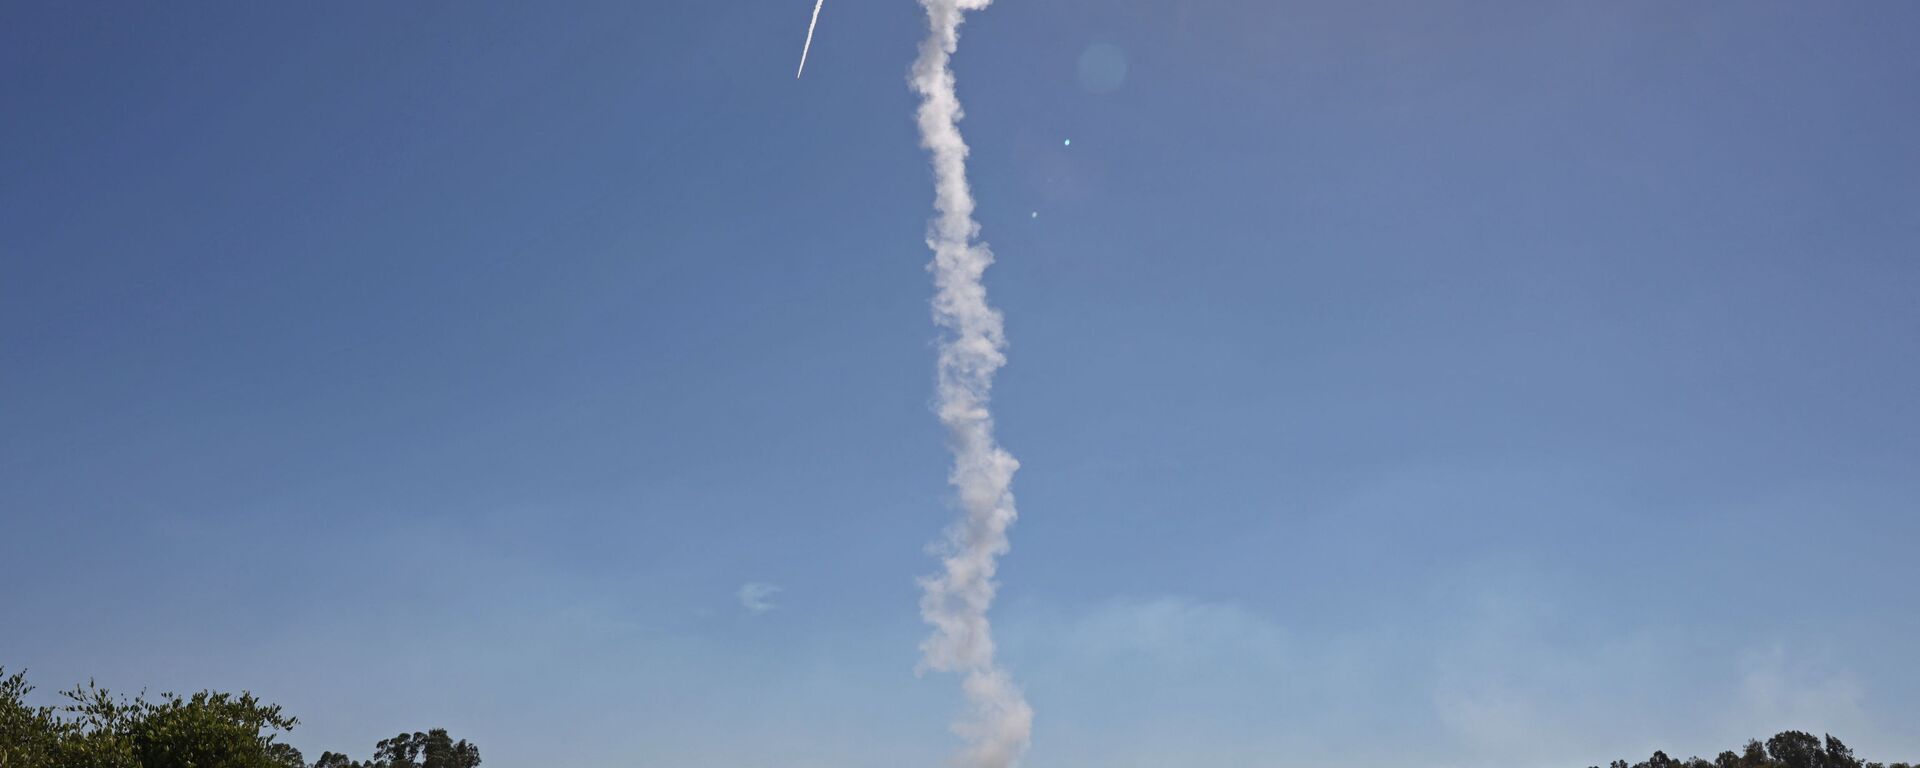 Israel's Iron Dome aerial defence system is launched to intercept rockets launched from the Gaza Strip, above the southern Israeli city of Sderot, on May 18, 2021. - Sputnik International, 1920, 23.08.2021